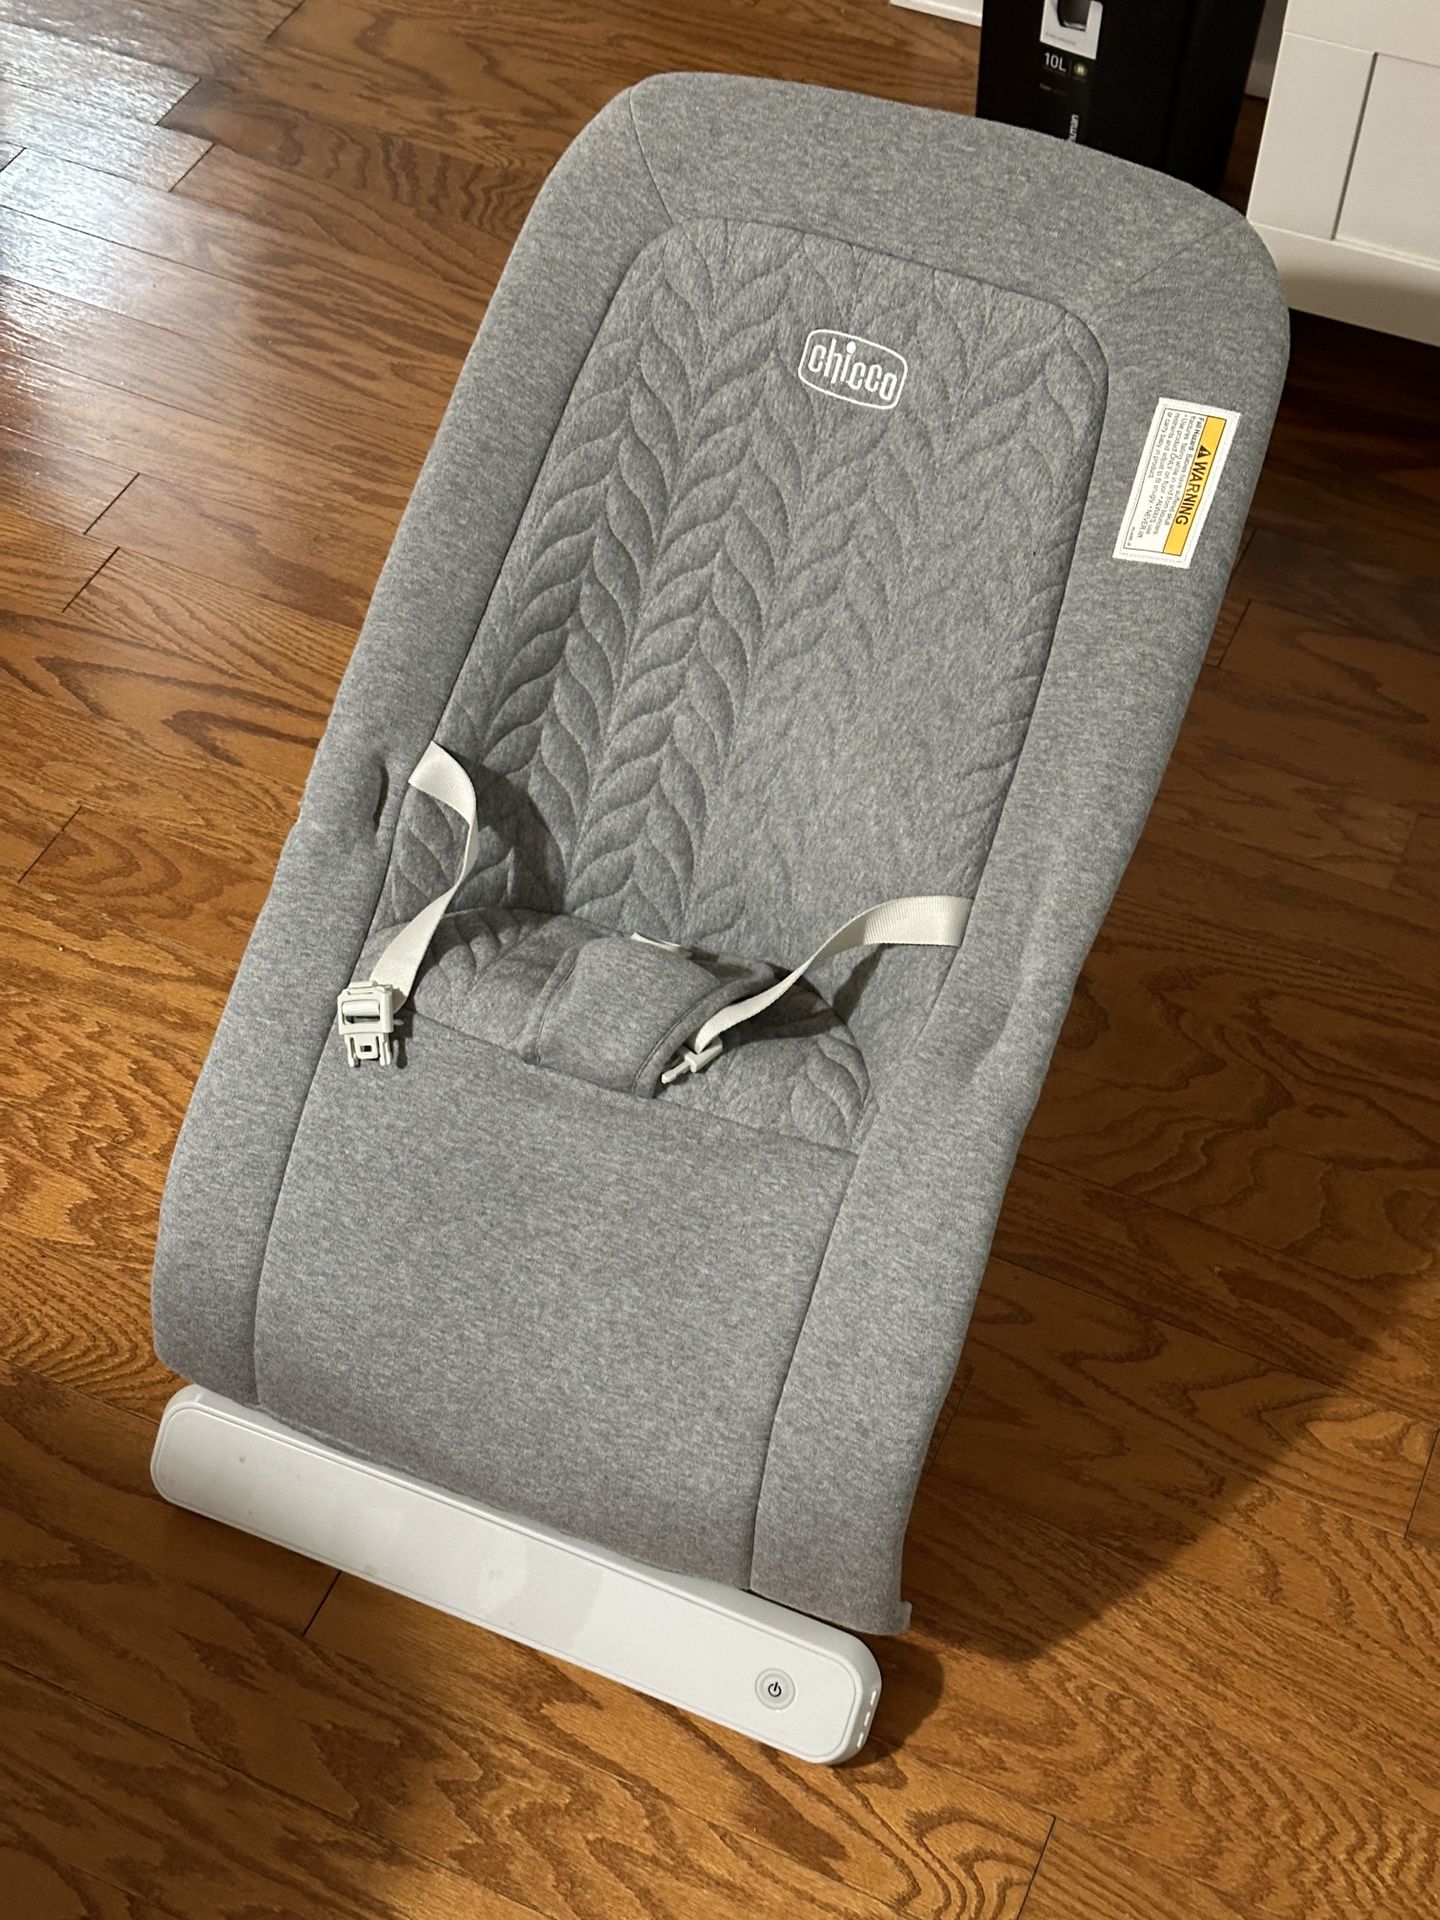 Chicco E-motion Baby Bouncer